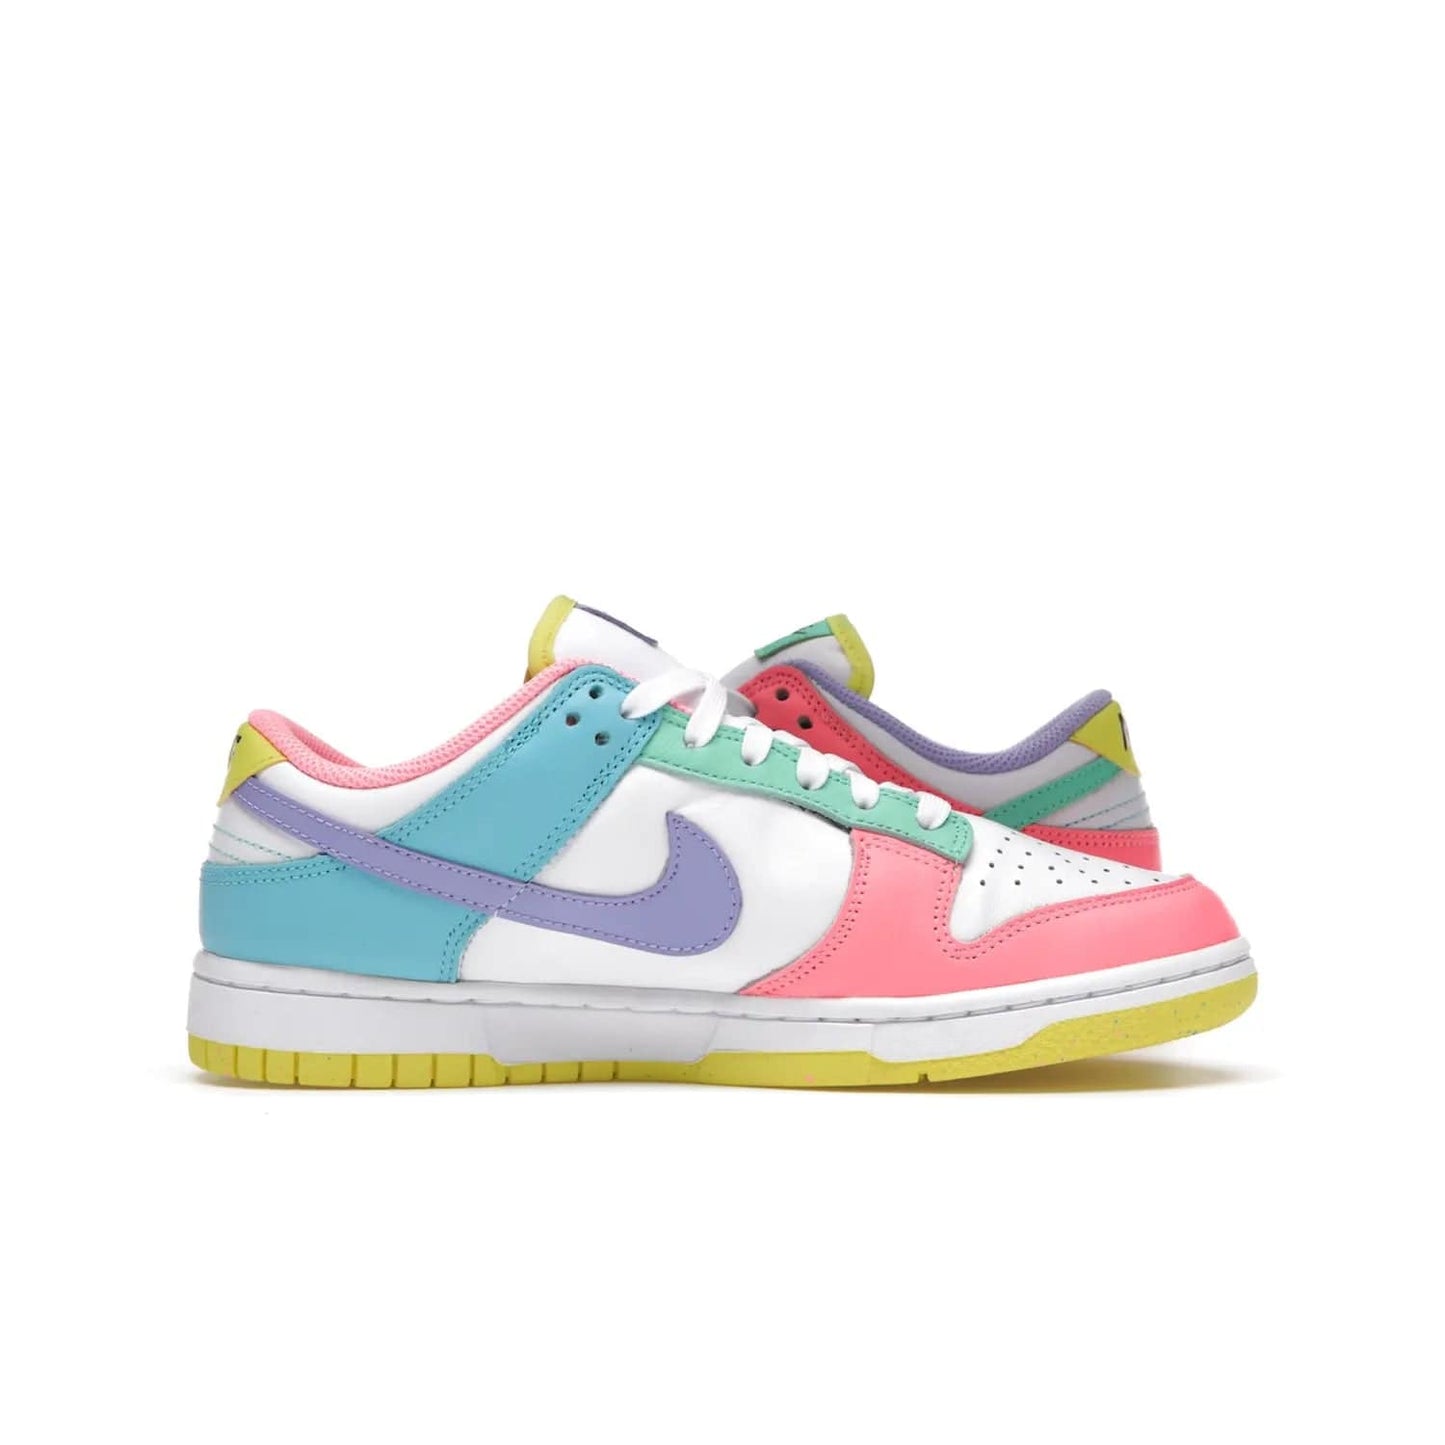 Nike Dunk Low SE Easter Candy (Women's) - Image 19 - Only at www.BallersClubKickz.com - UP
The Nike Dunk Low SE Easter Candy (Women's) brings a stylish touch to any outfit with its white leather upper, colorful accents, and multicolor speckle detailing. Shop now before they're gone.